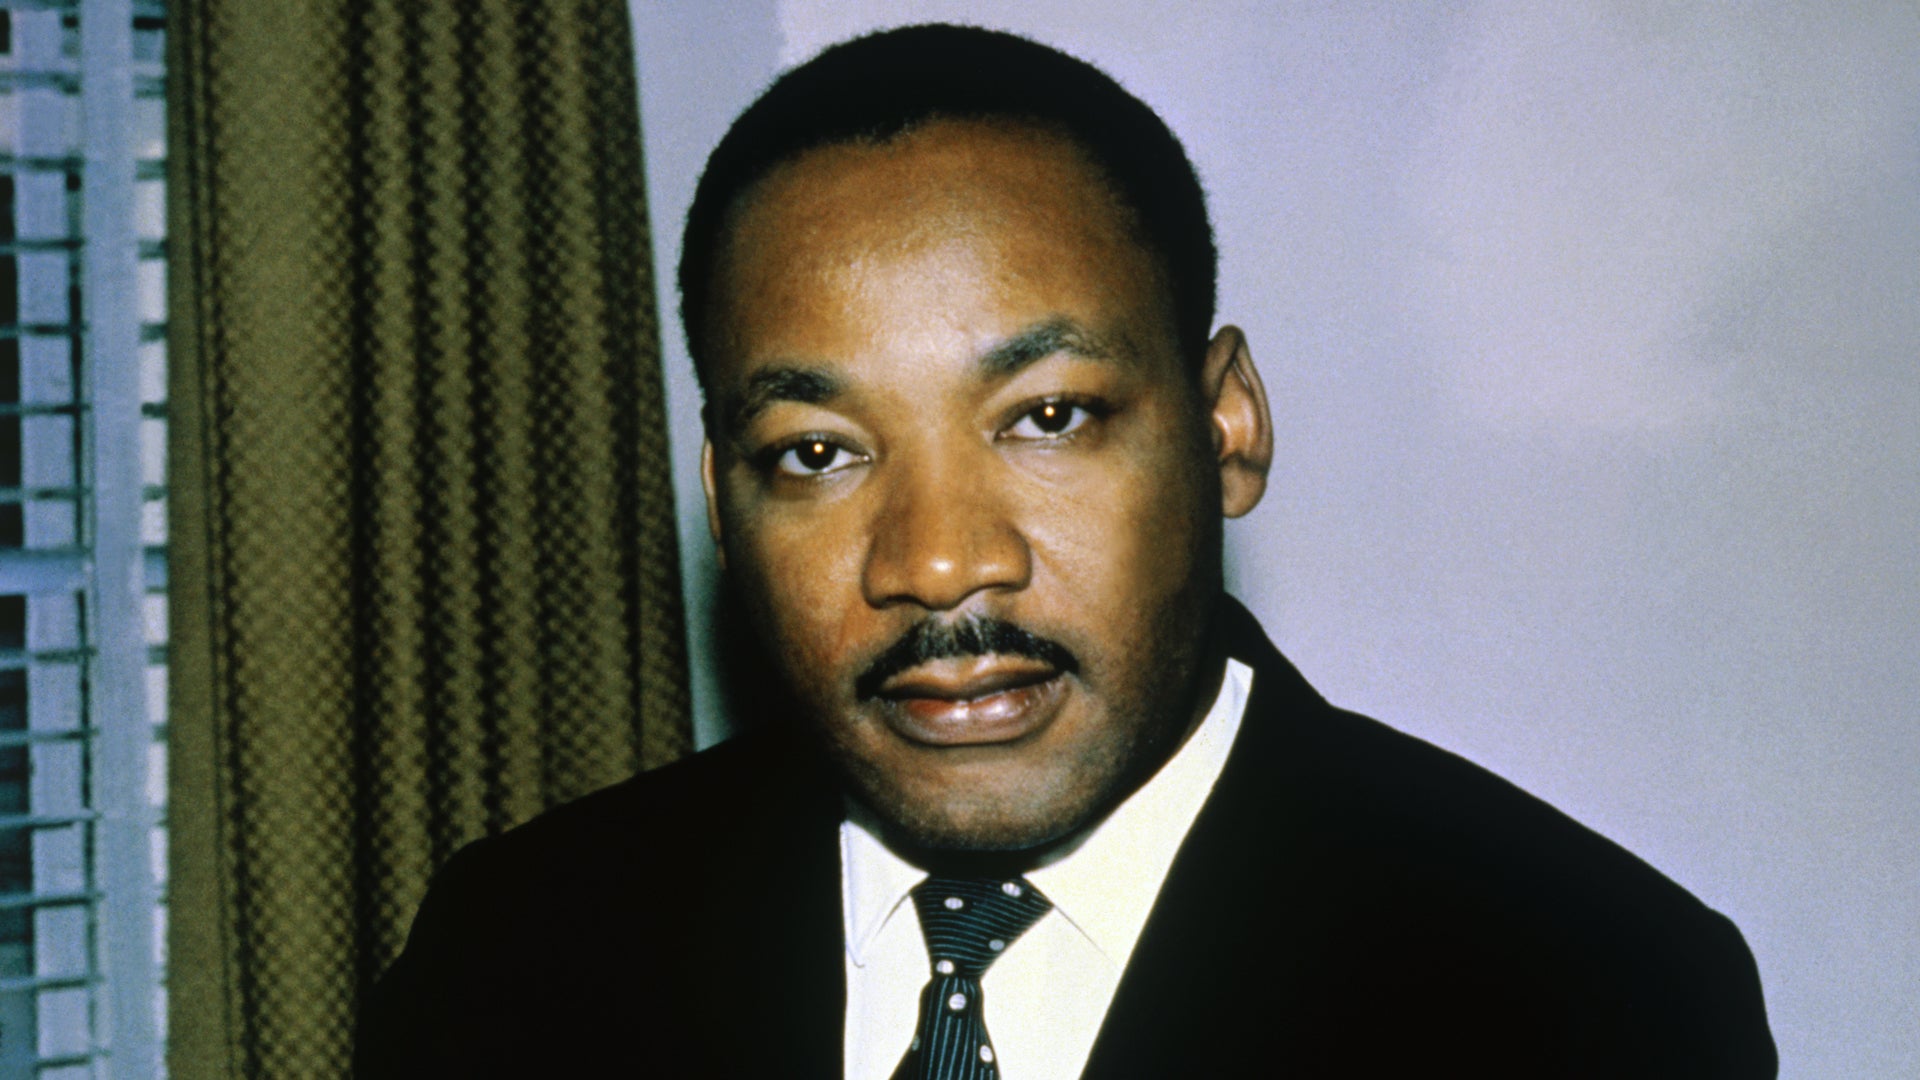 Martin Luther King Jr.’s Personalized Book For Nurse Who Saved His Life Up For Sale